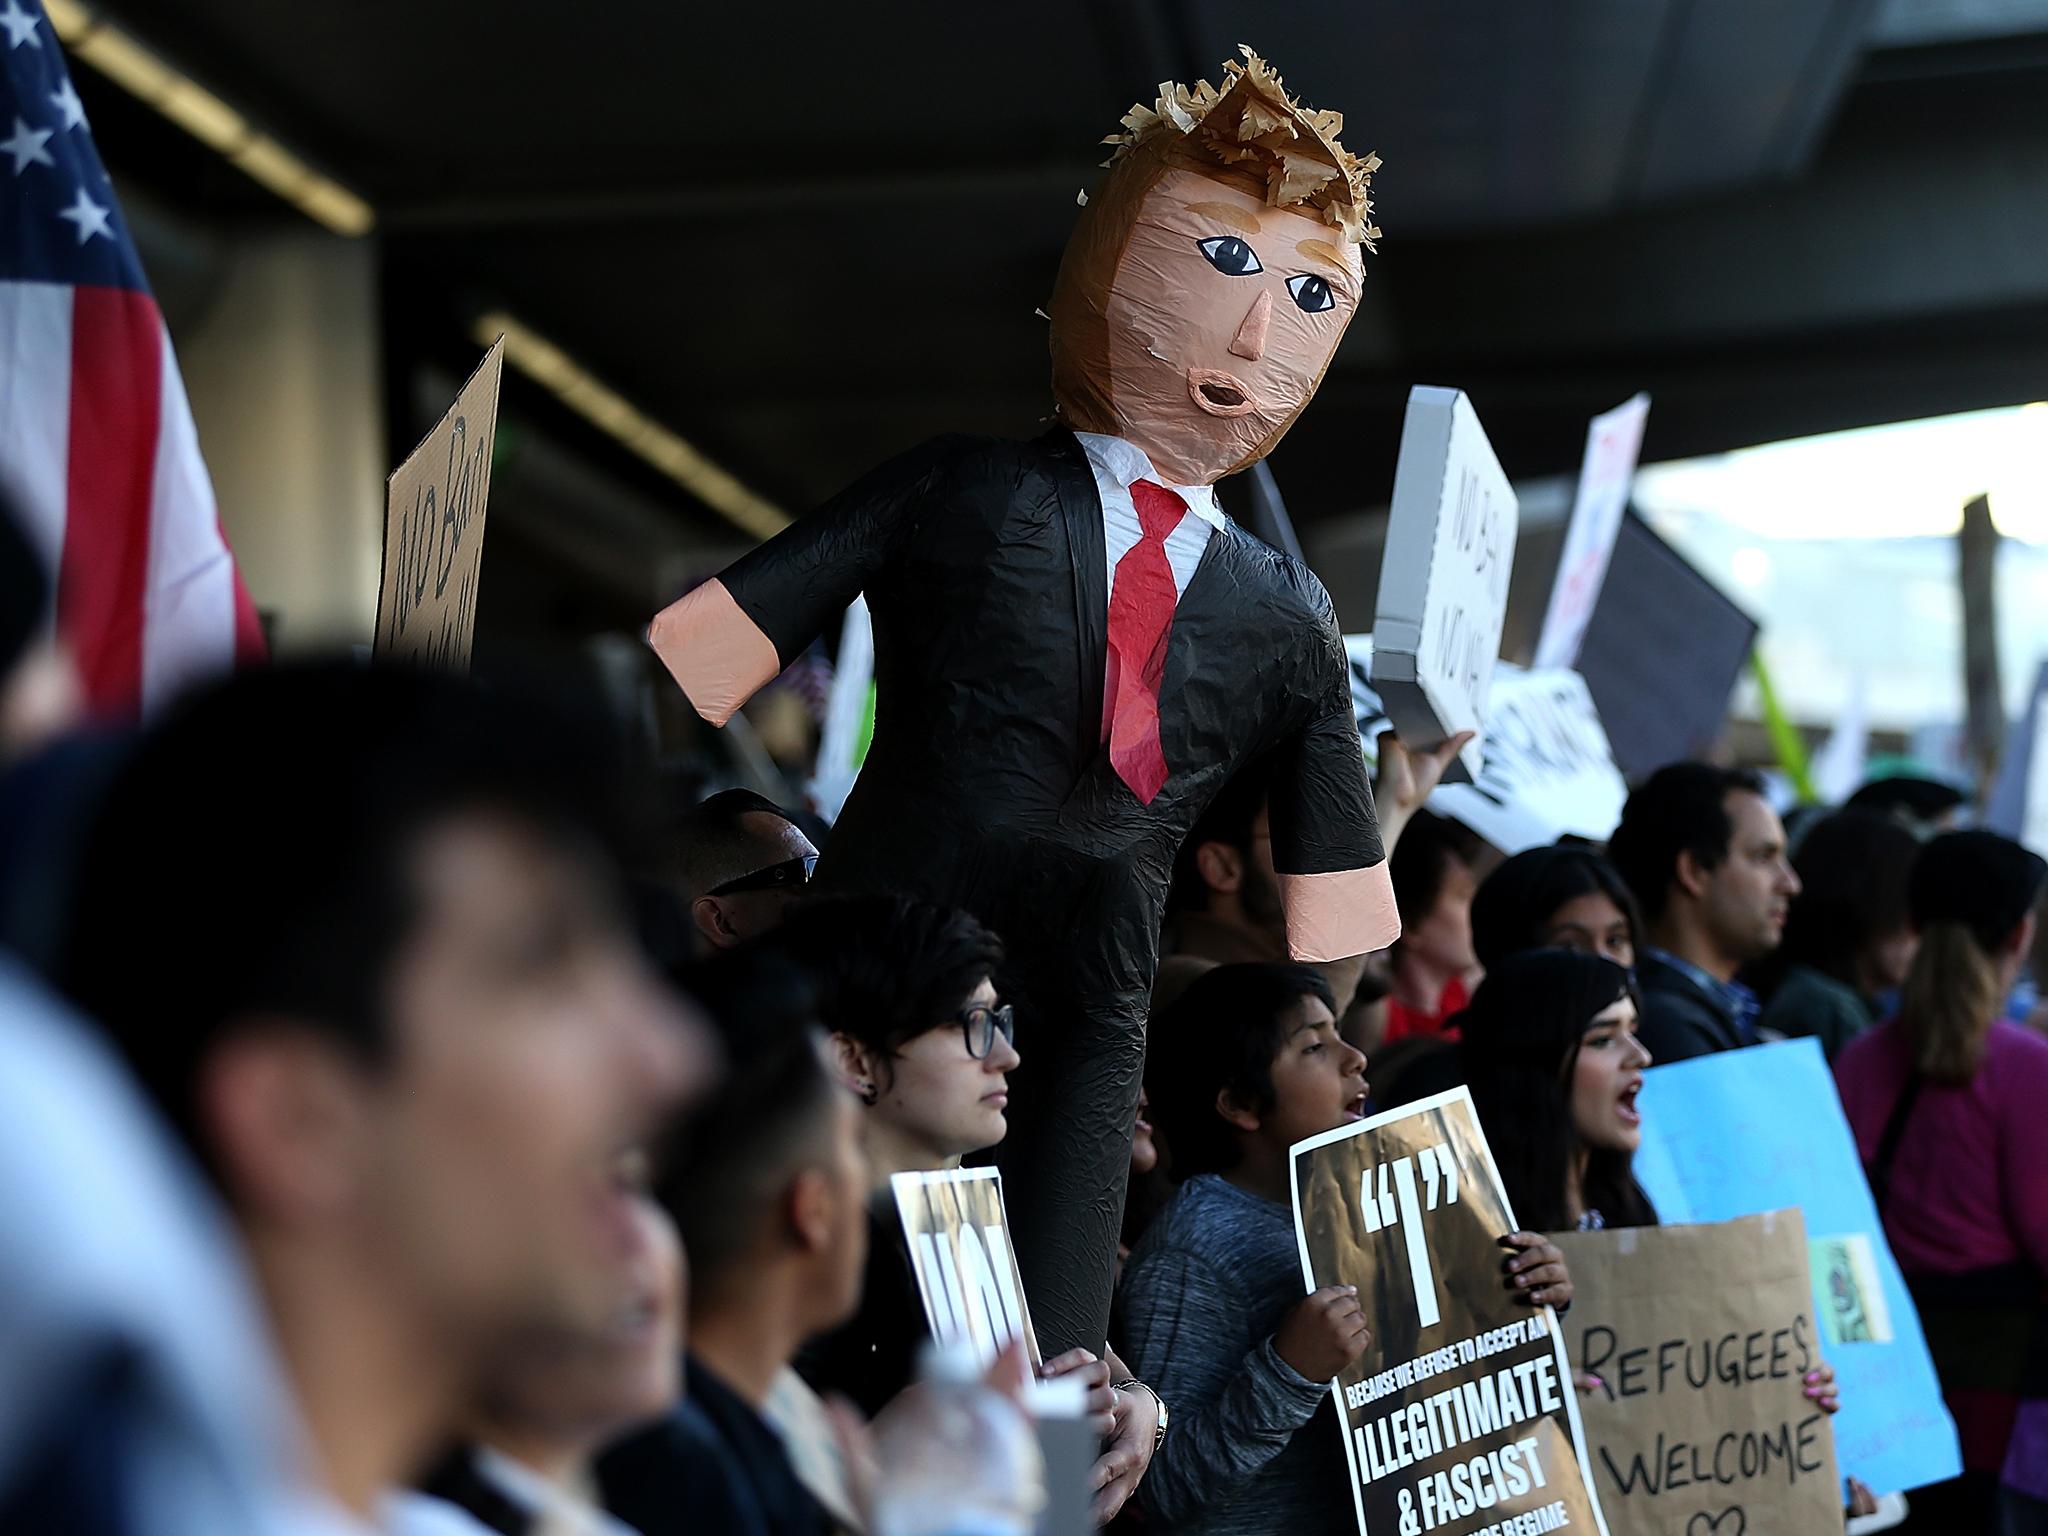 Protesters at LA International Airport vocally expressed their disapproval of Donald Trump following his executive order banning refugees from seven Muslim countries